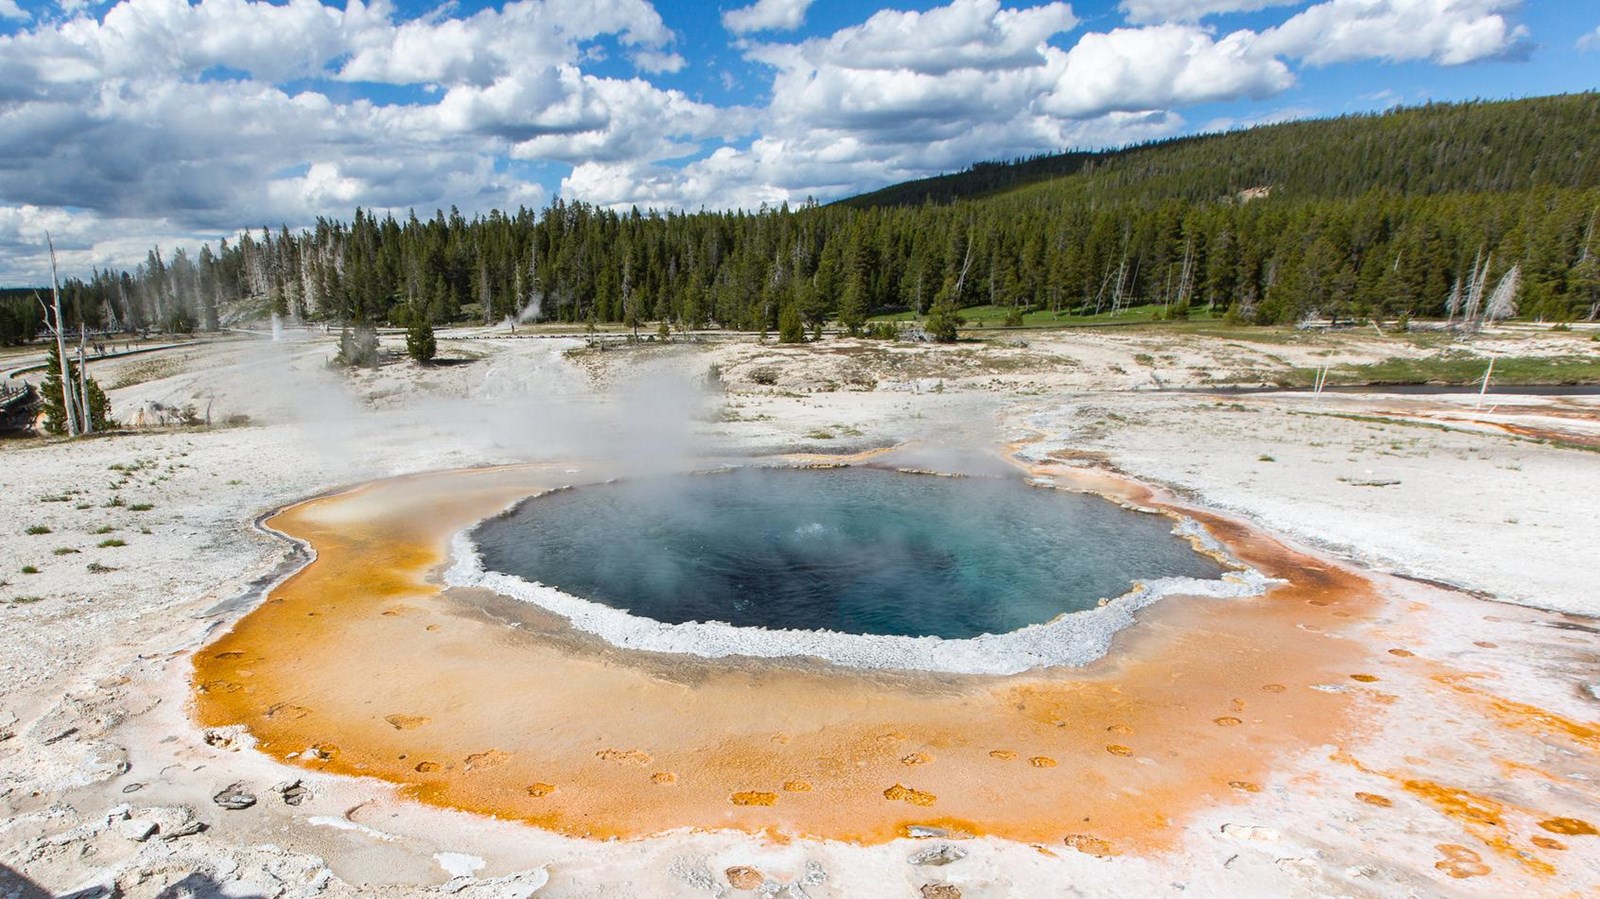 A deep blue hot spring surrounded by orange microbial mats.